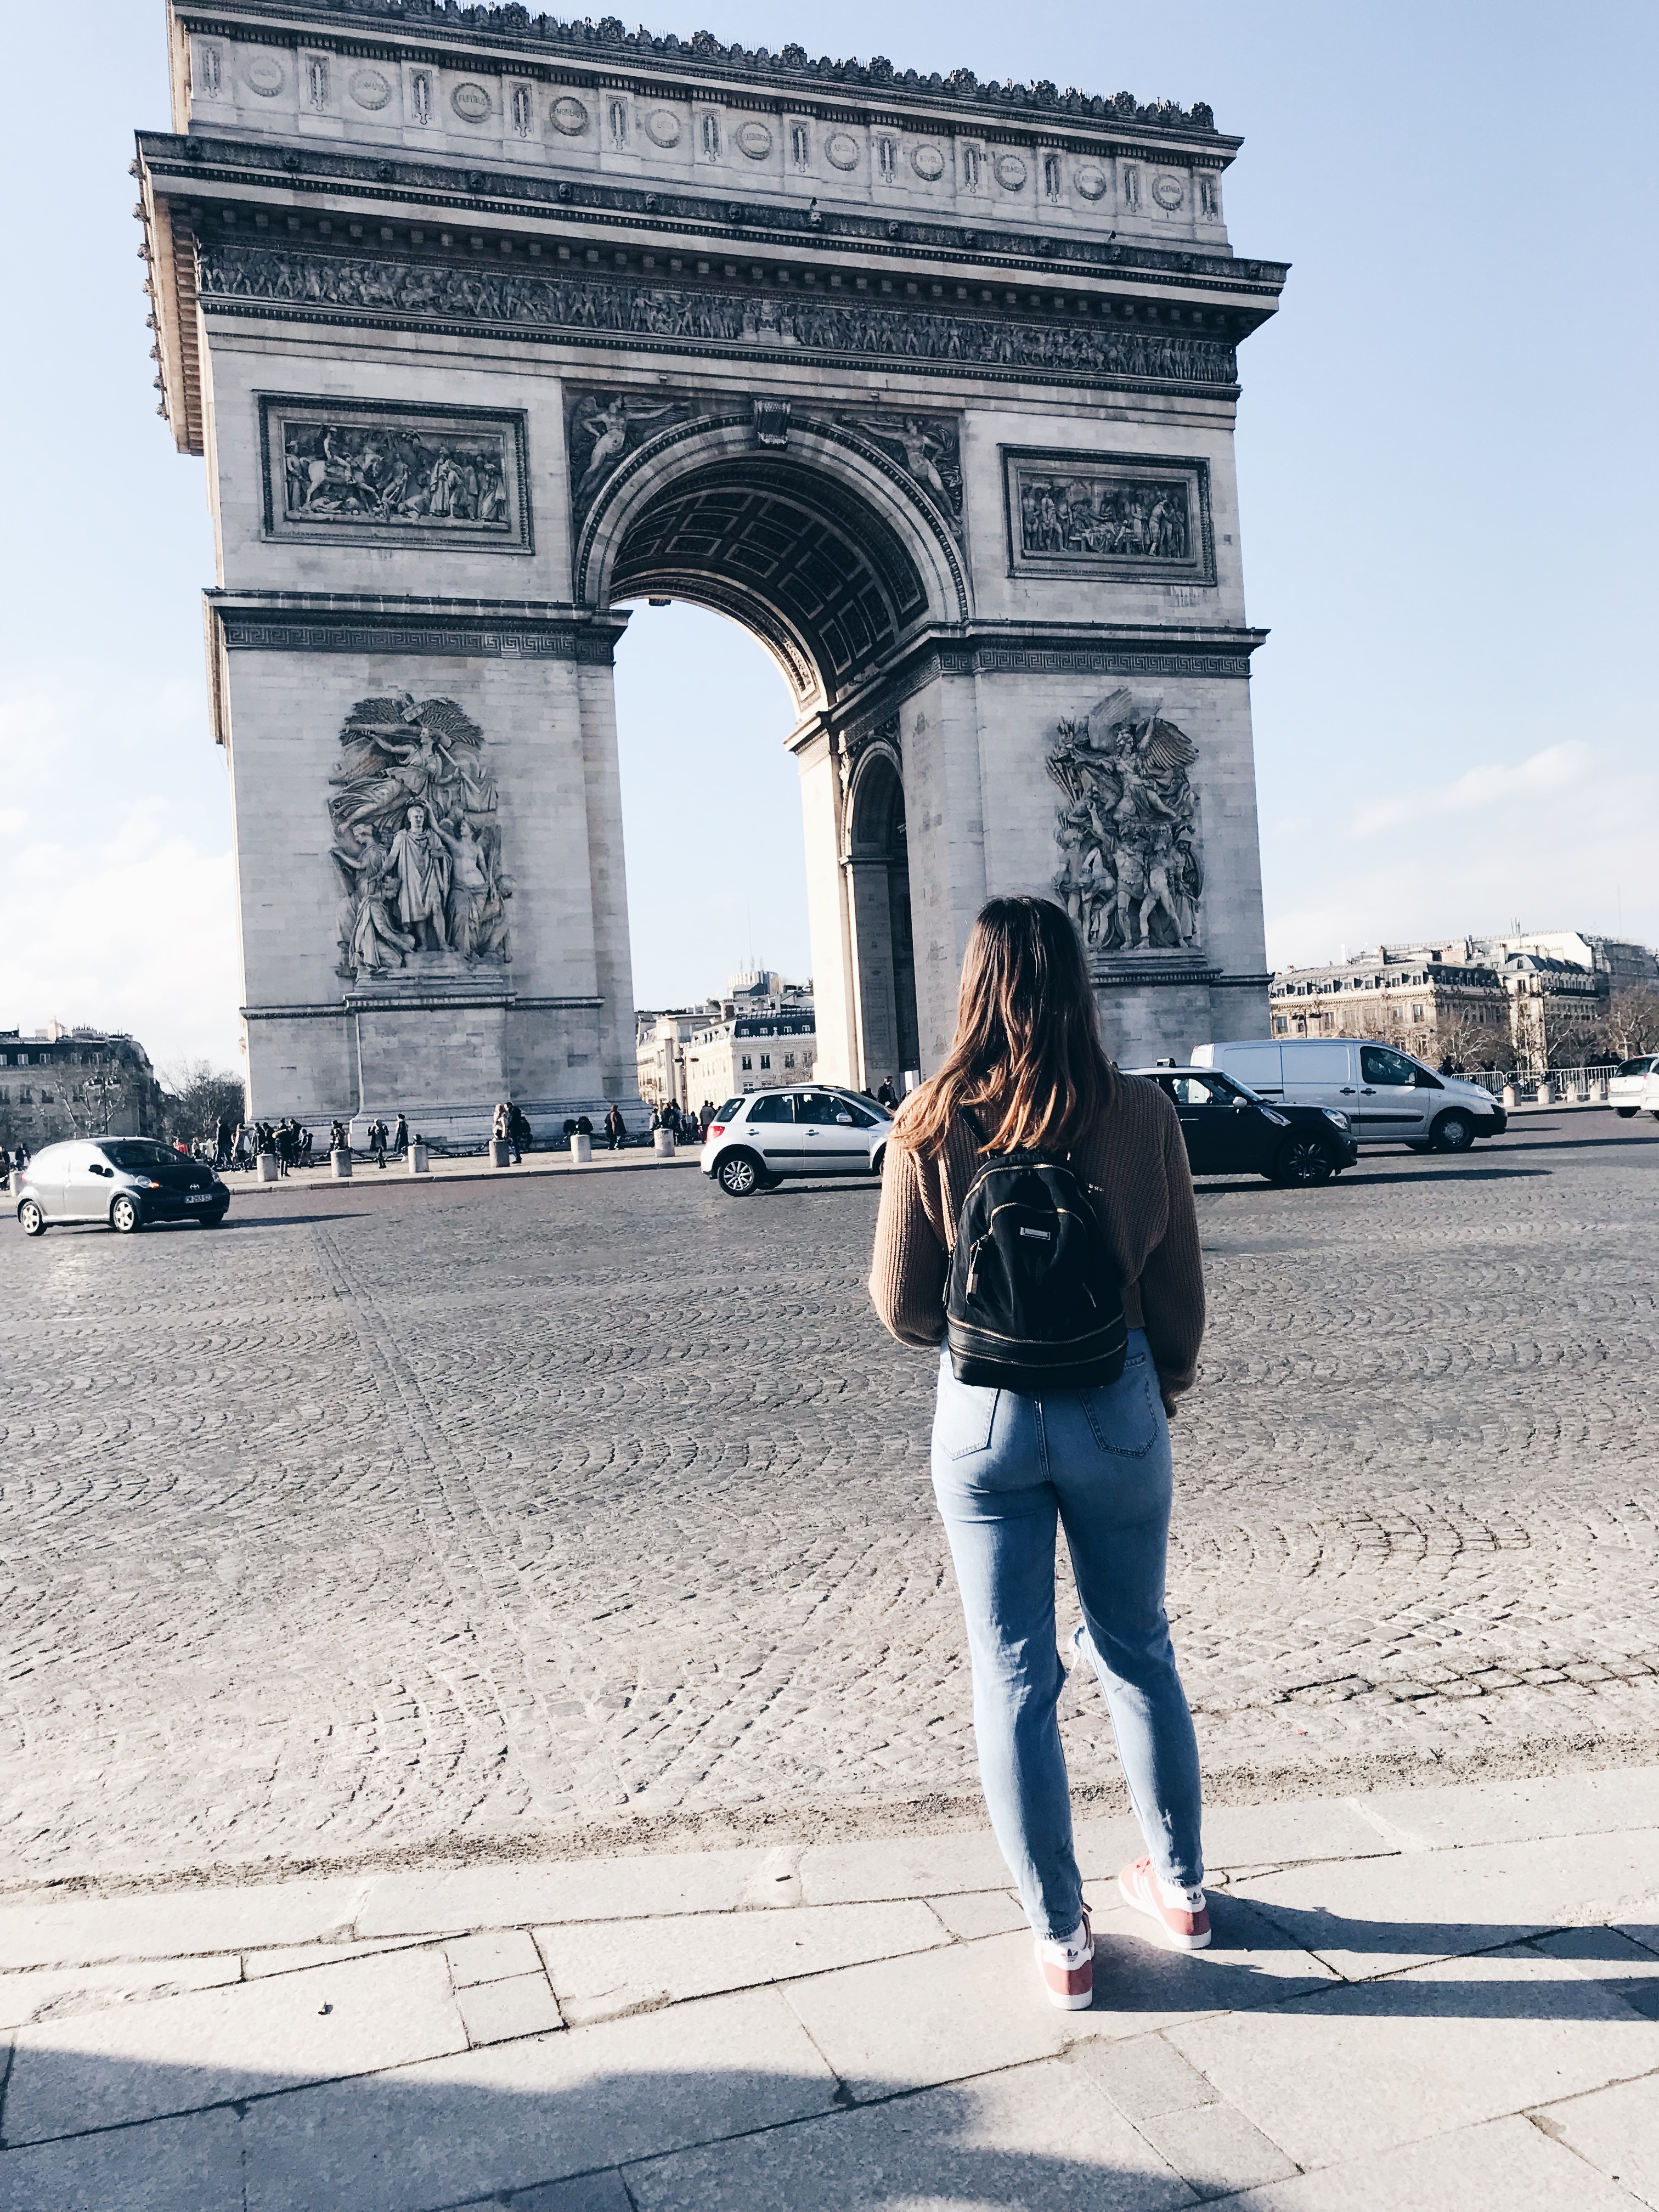 things to see in paris, arc de triomphe